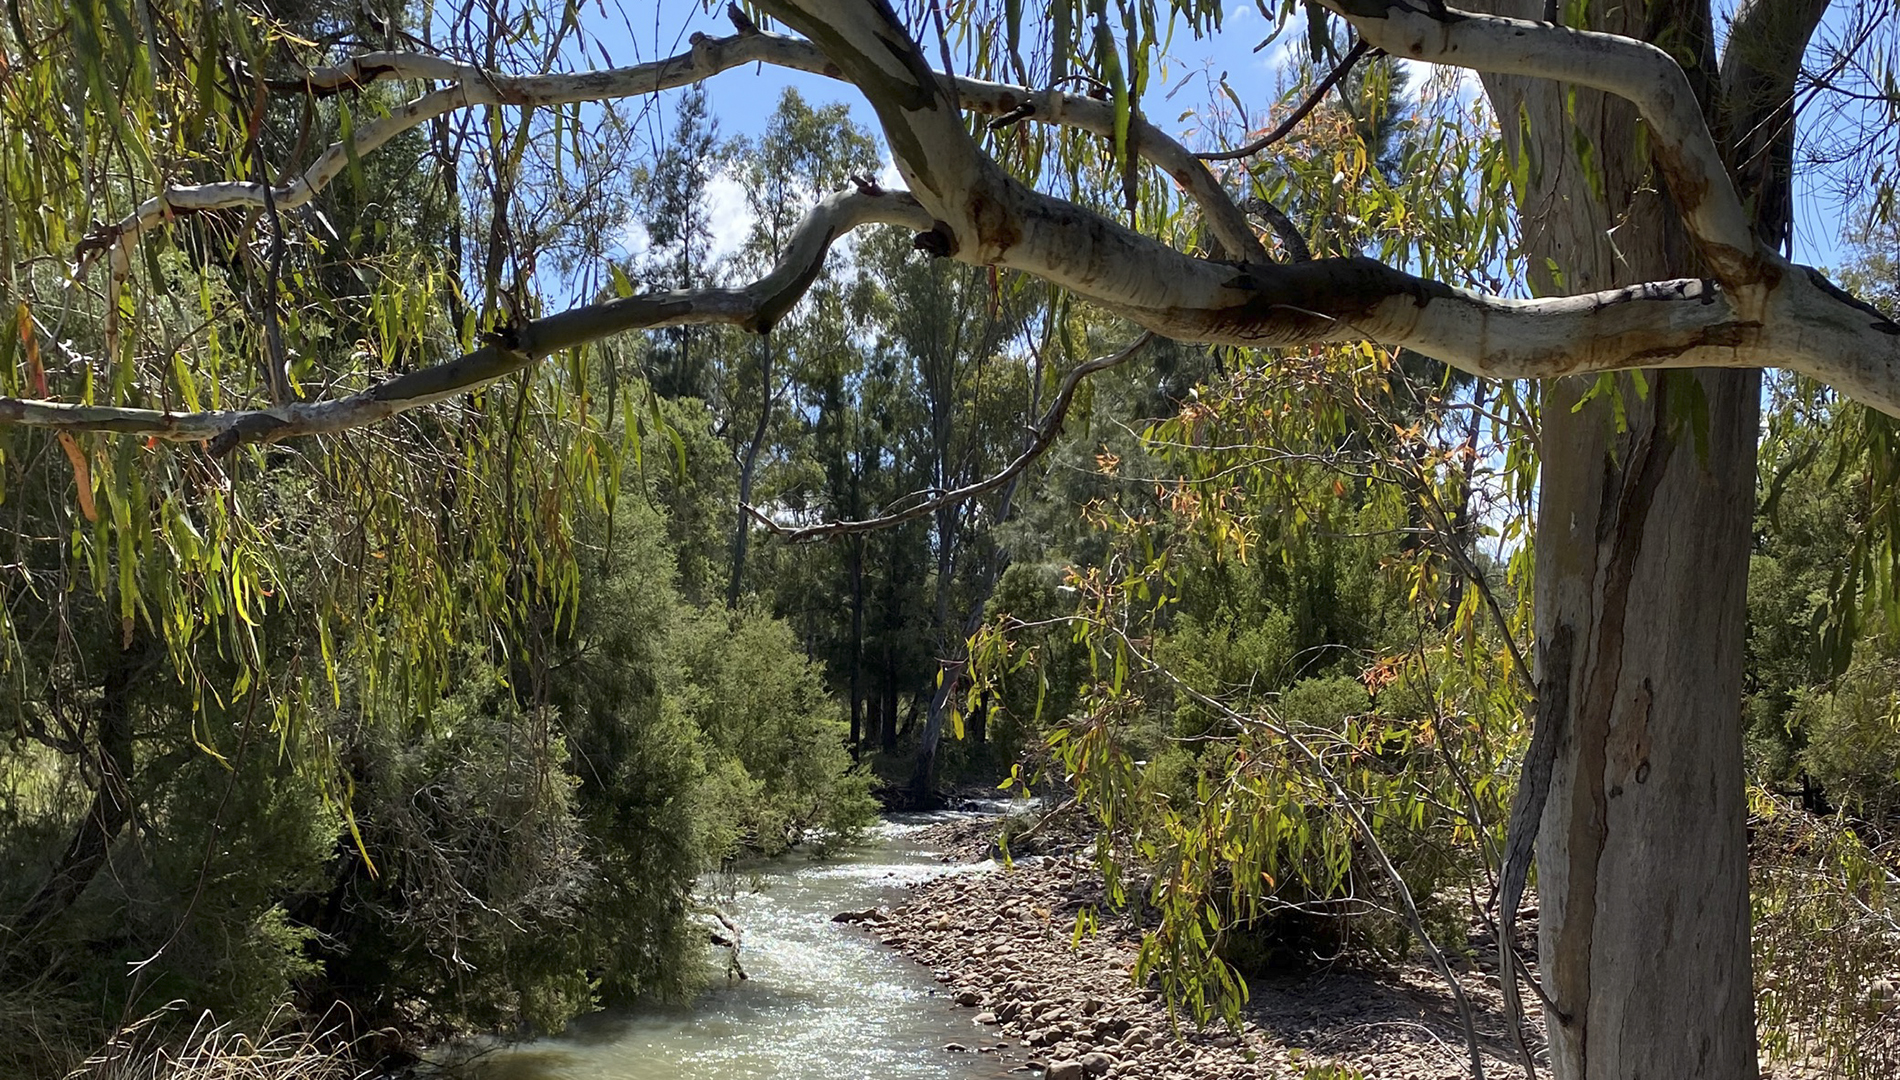 Riparian river red gum community at Middle Creek, Namoi Catchment. Middle Creek is connected to groundwater upstream of the Elfin crossing. Photo: Sharon Bowen (DPE Water, 2022).